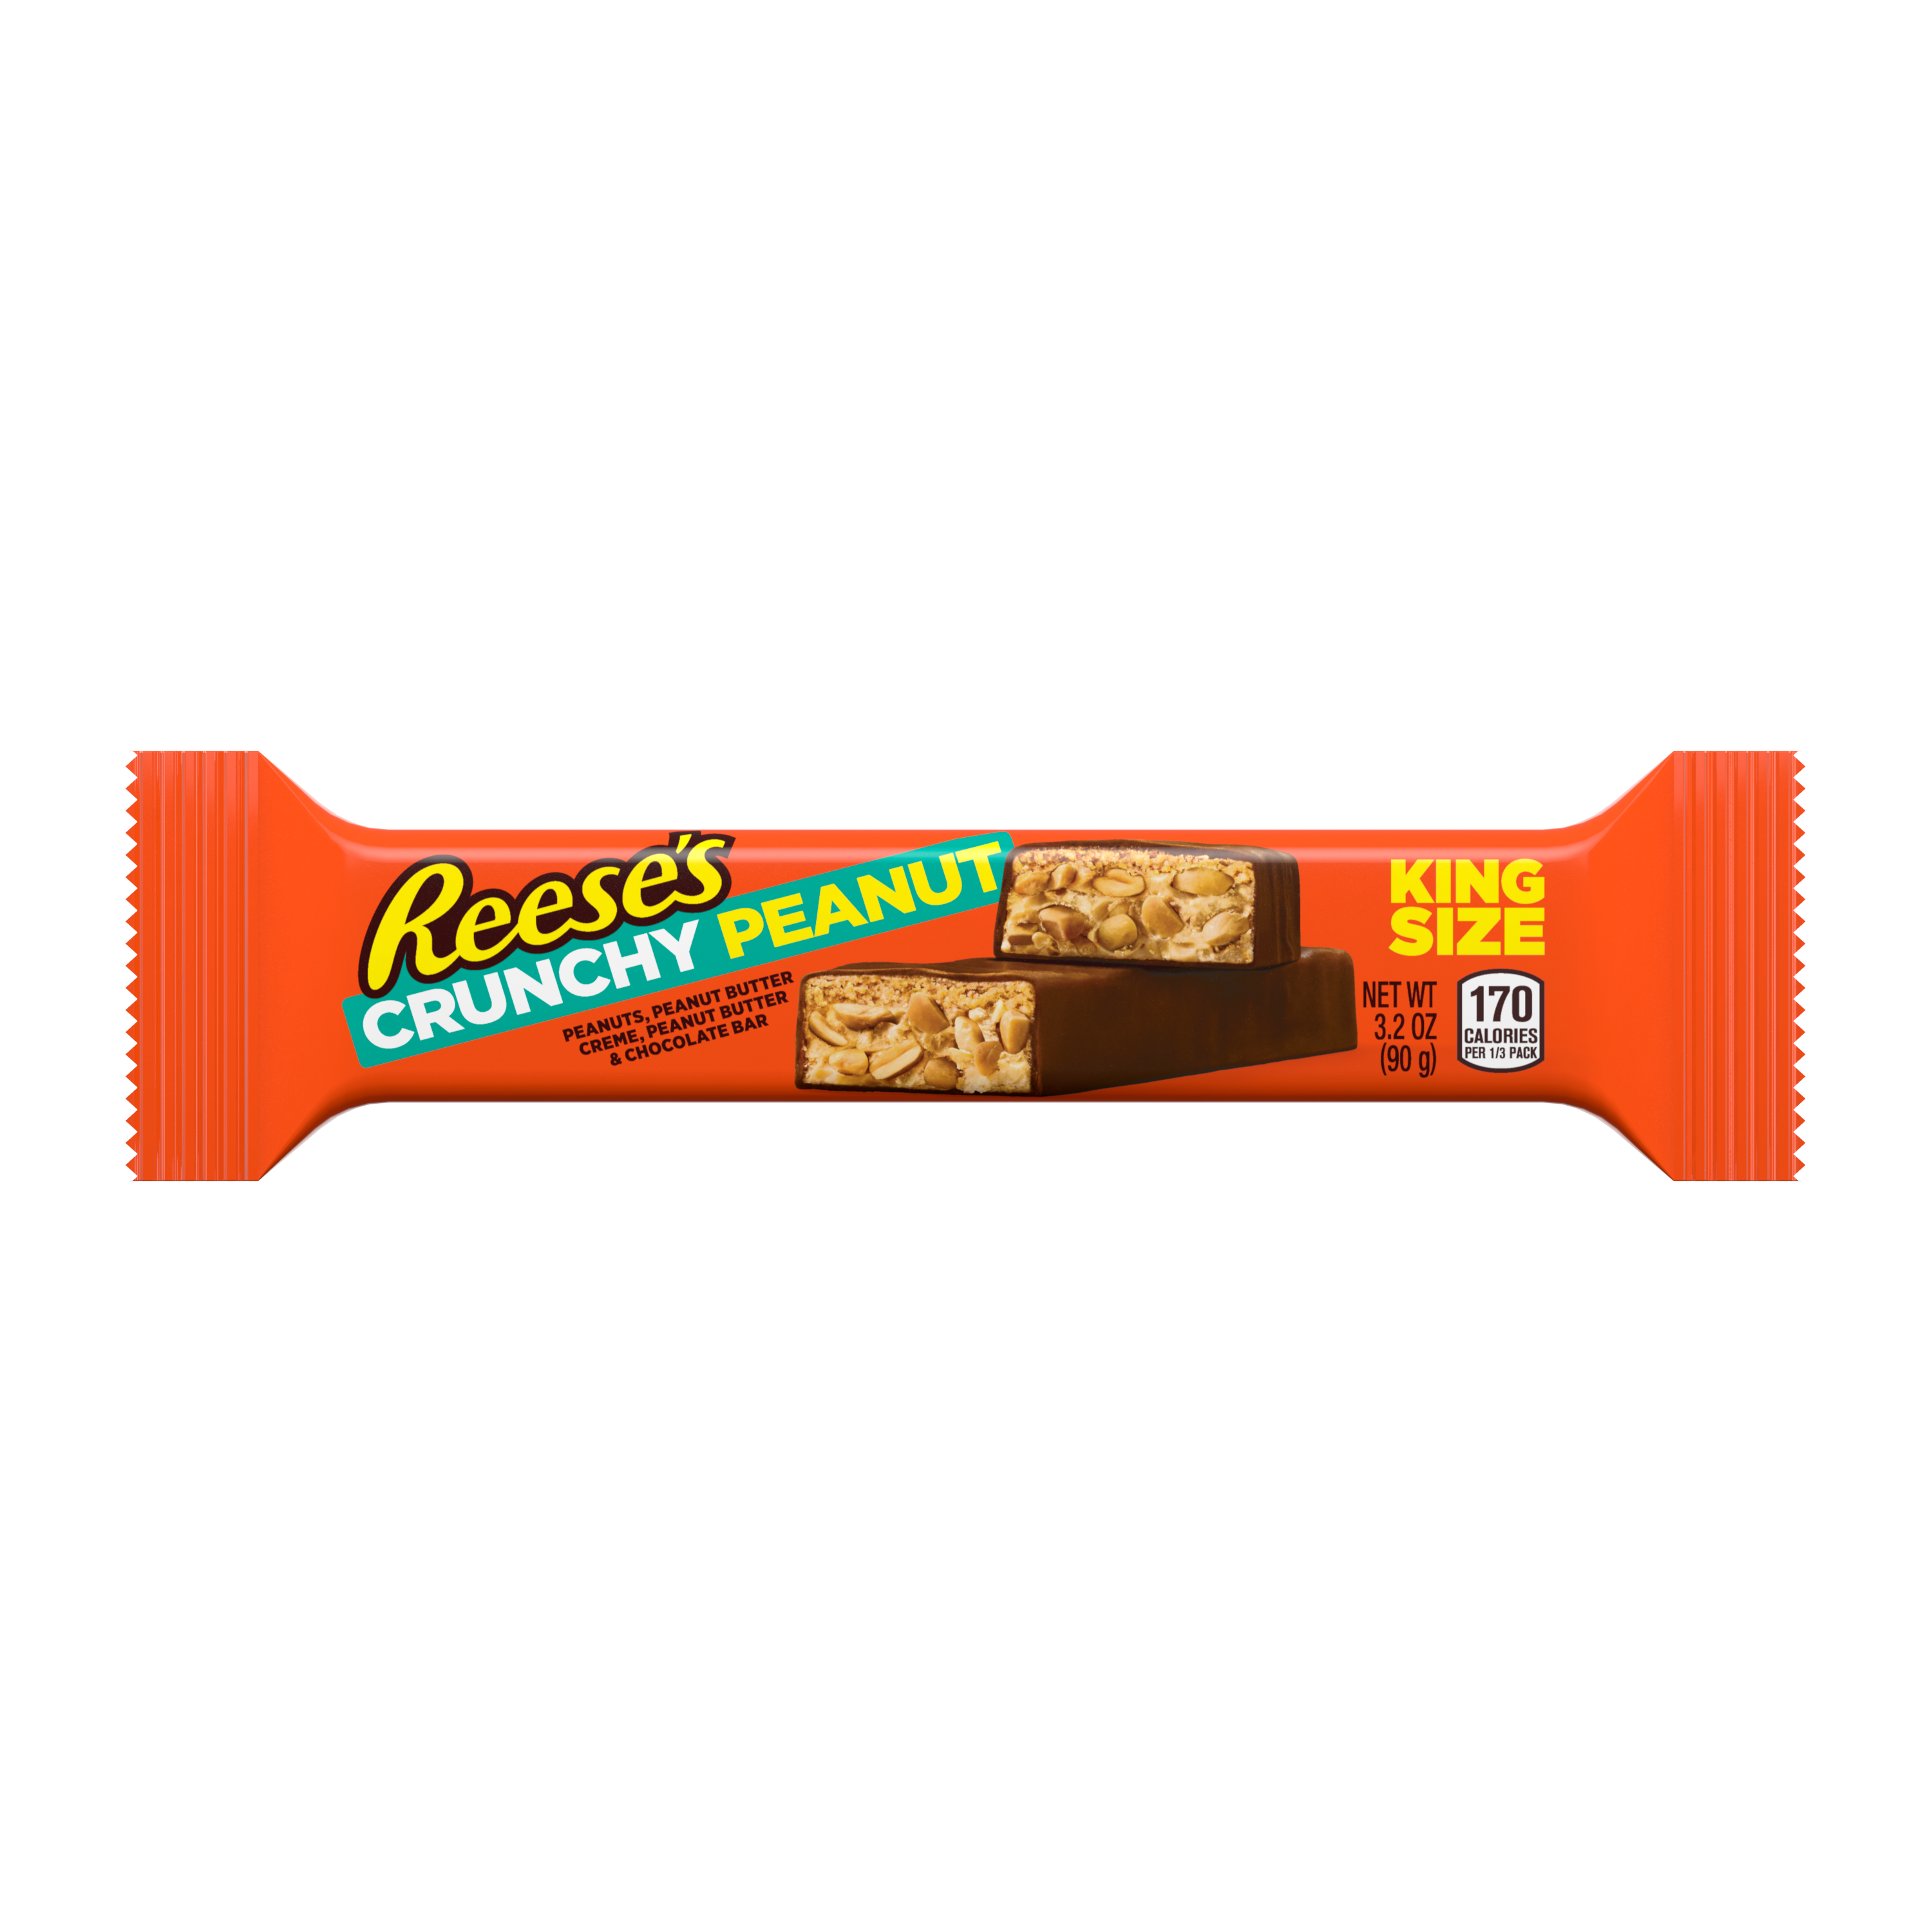 REESE'S Crunchy Peanut King Size Candy Bar, 3.2 oz - Front of Package